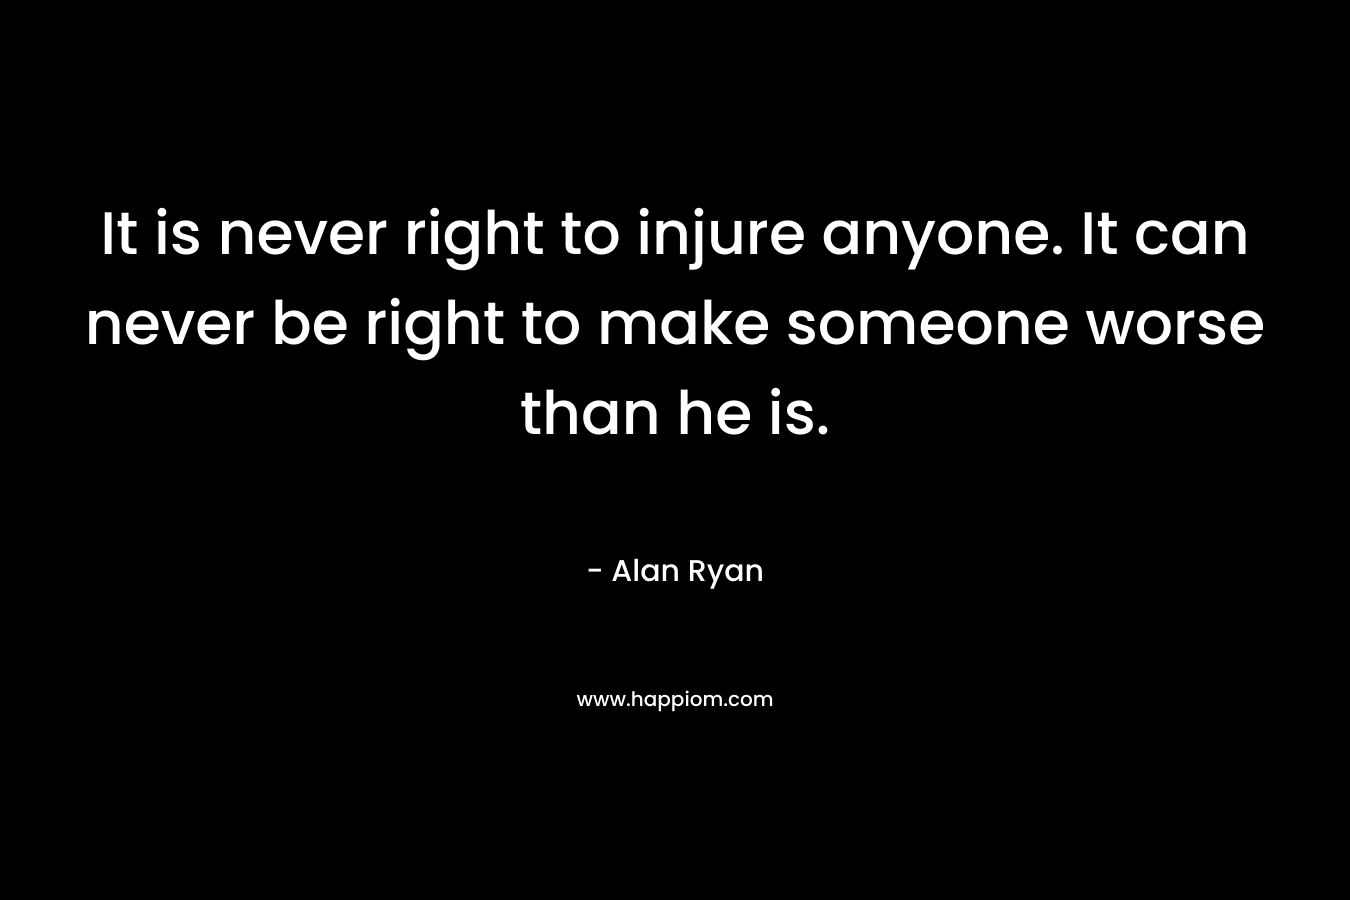 It is never right to injure anyone. It can never be right to make someone worse than he is. – Alan Ryan